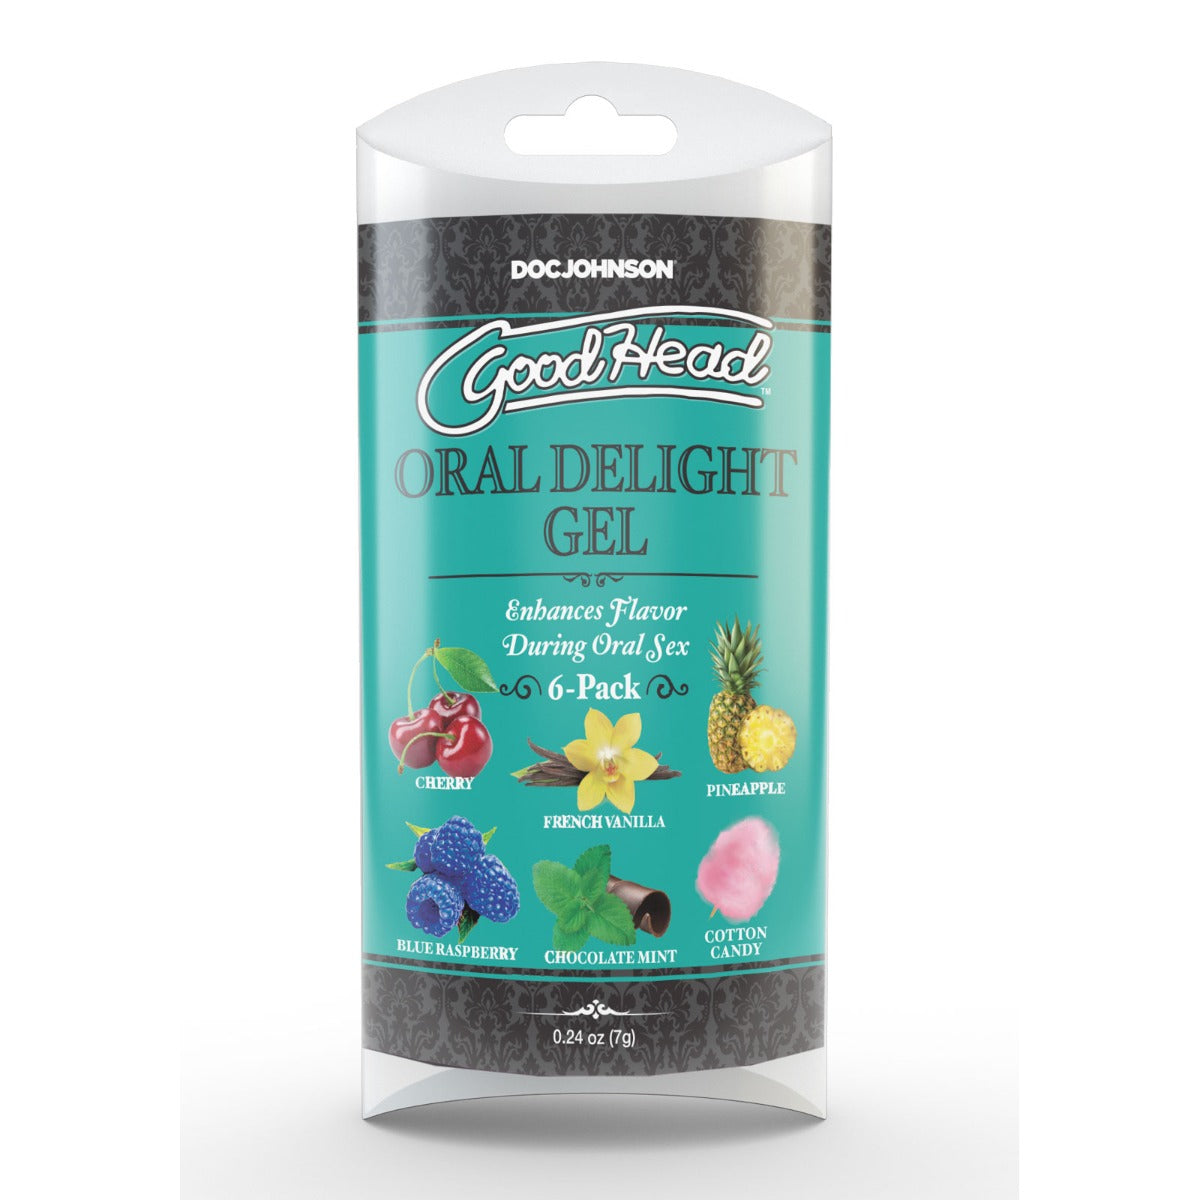 GoodHead Oral Delight Gel 6 Pack Blue Raspberry Cherry Chocolate Mint Cotton Candy French Vanilla Pineapple Oral Lubricant